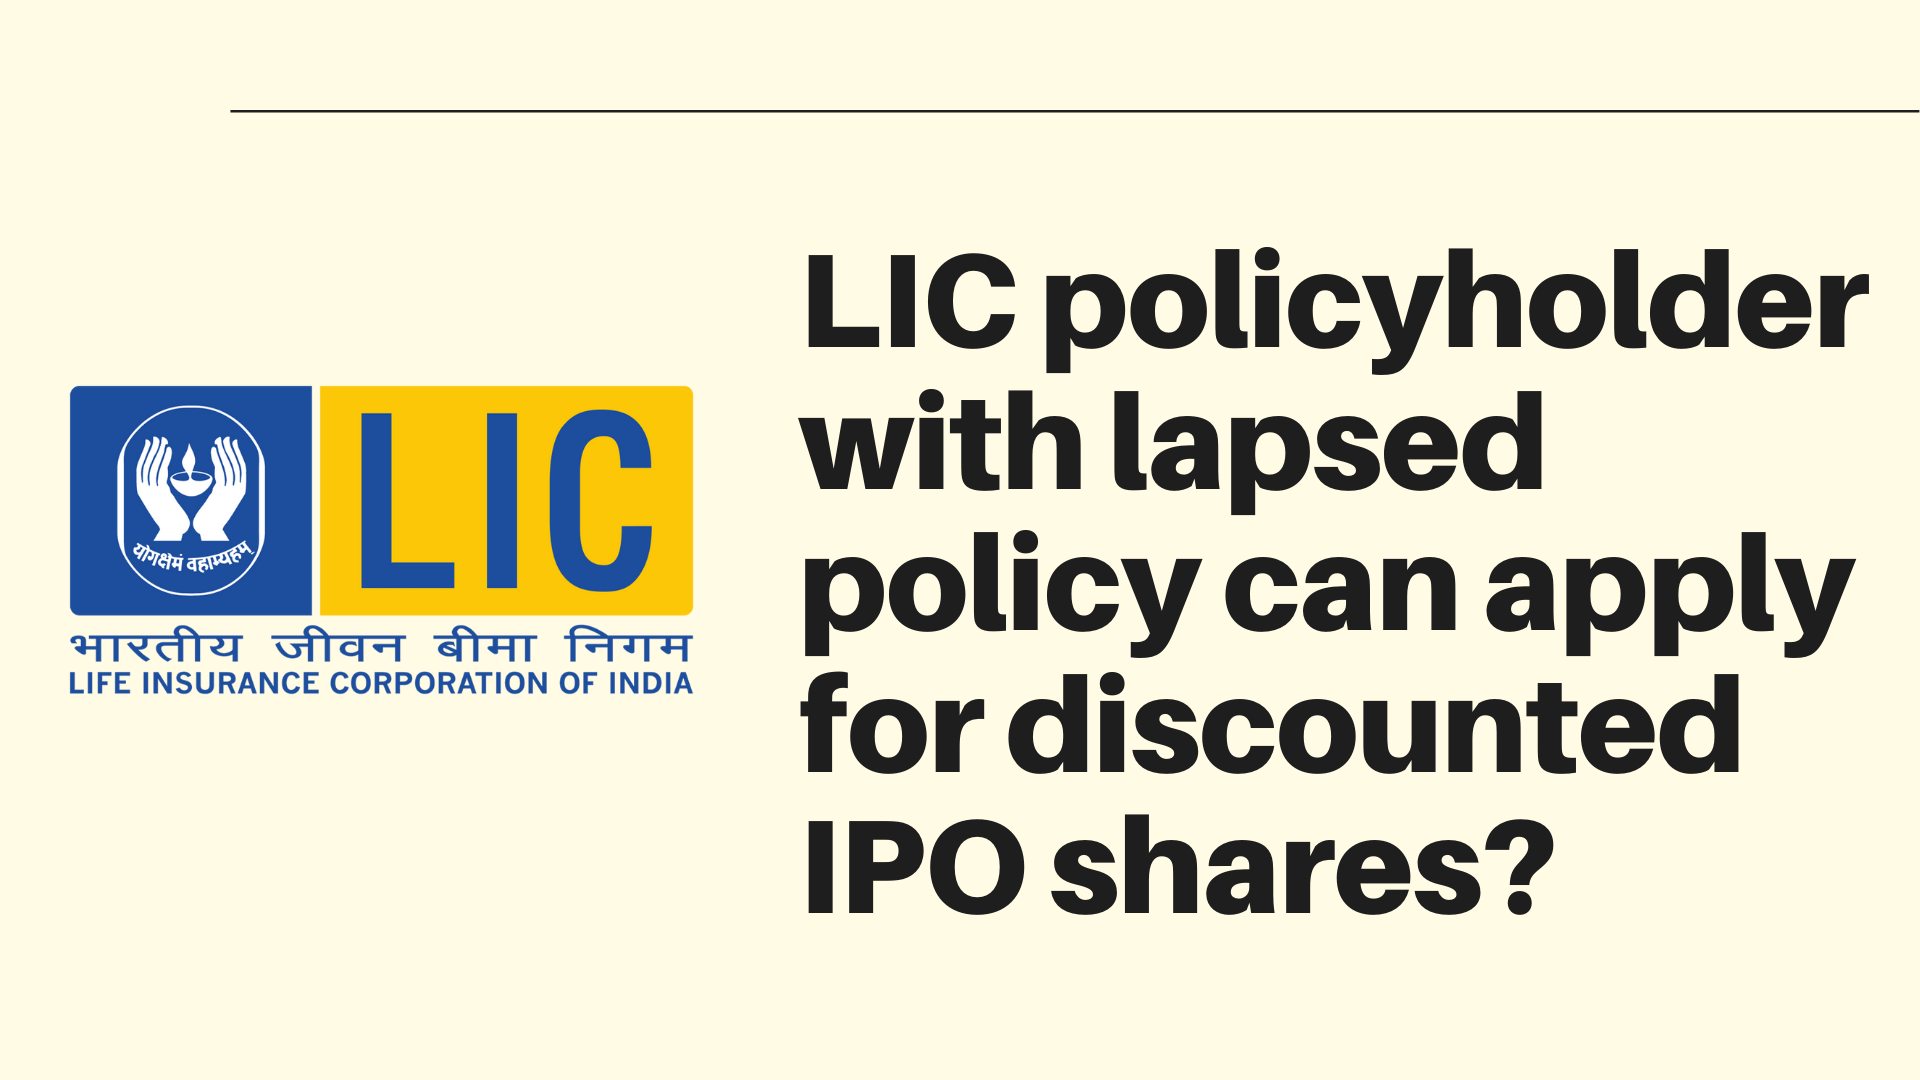 LIC policyholder with lapsed policy